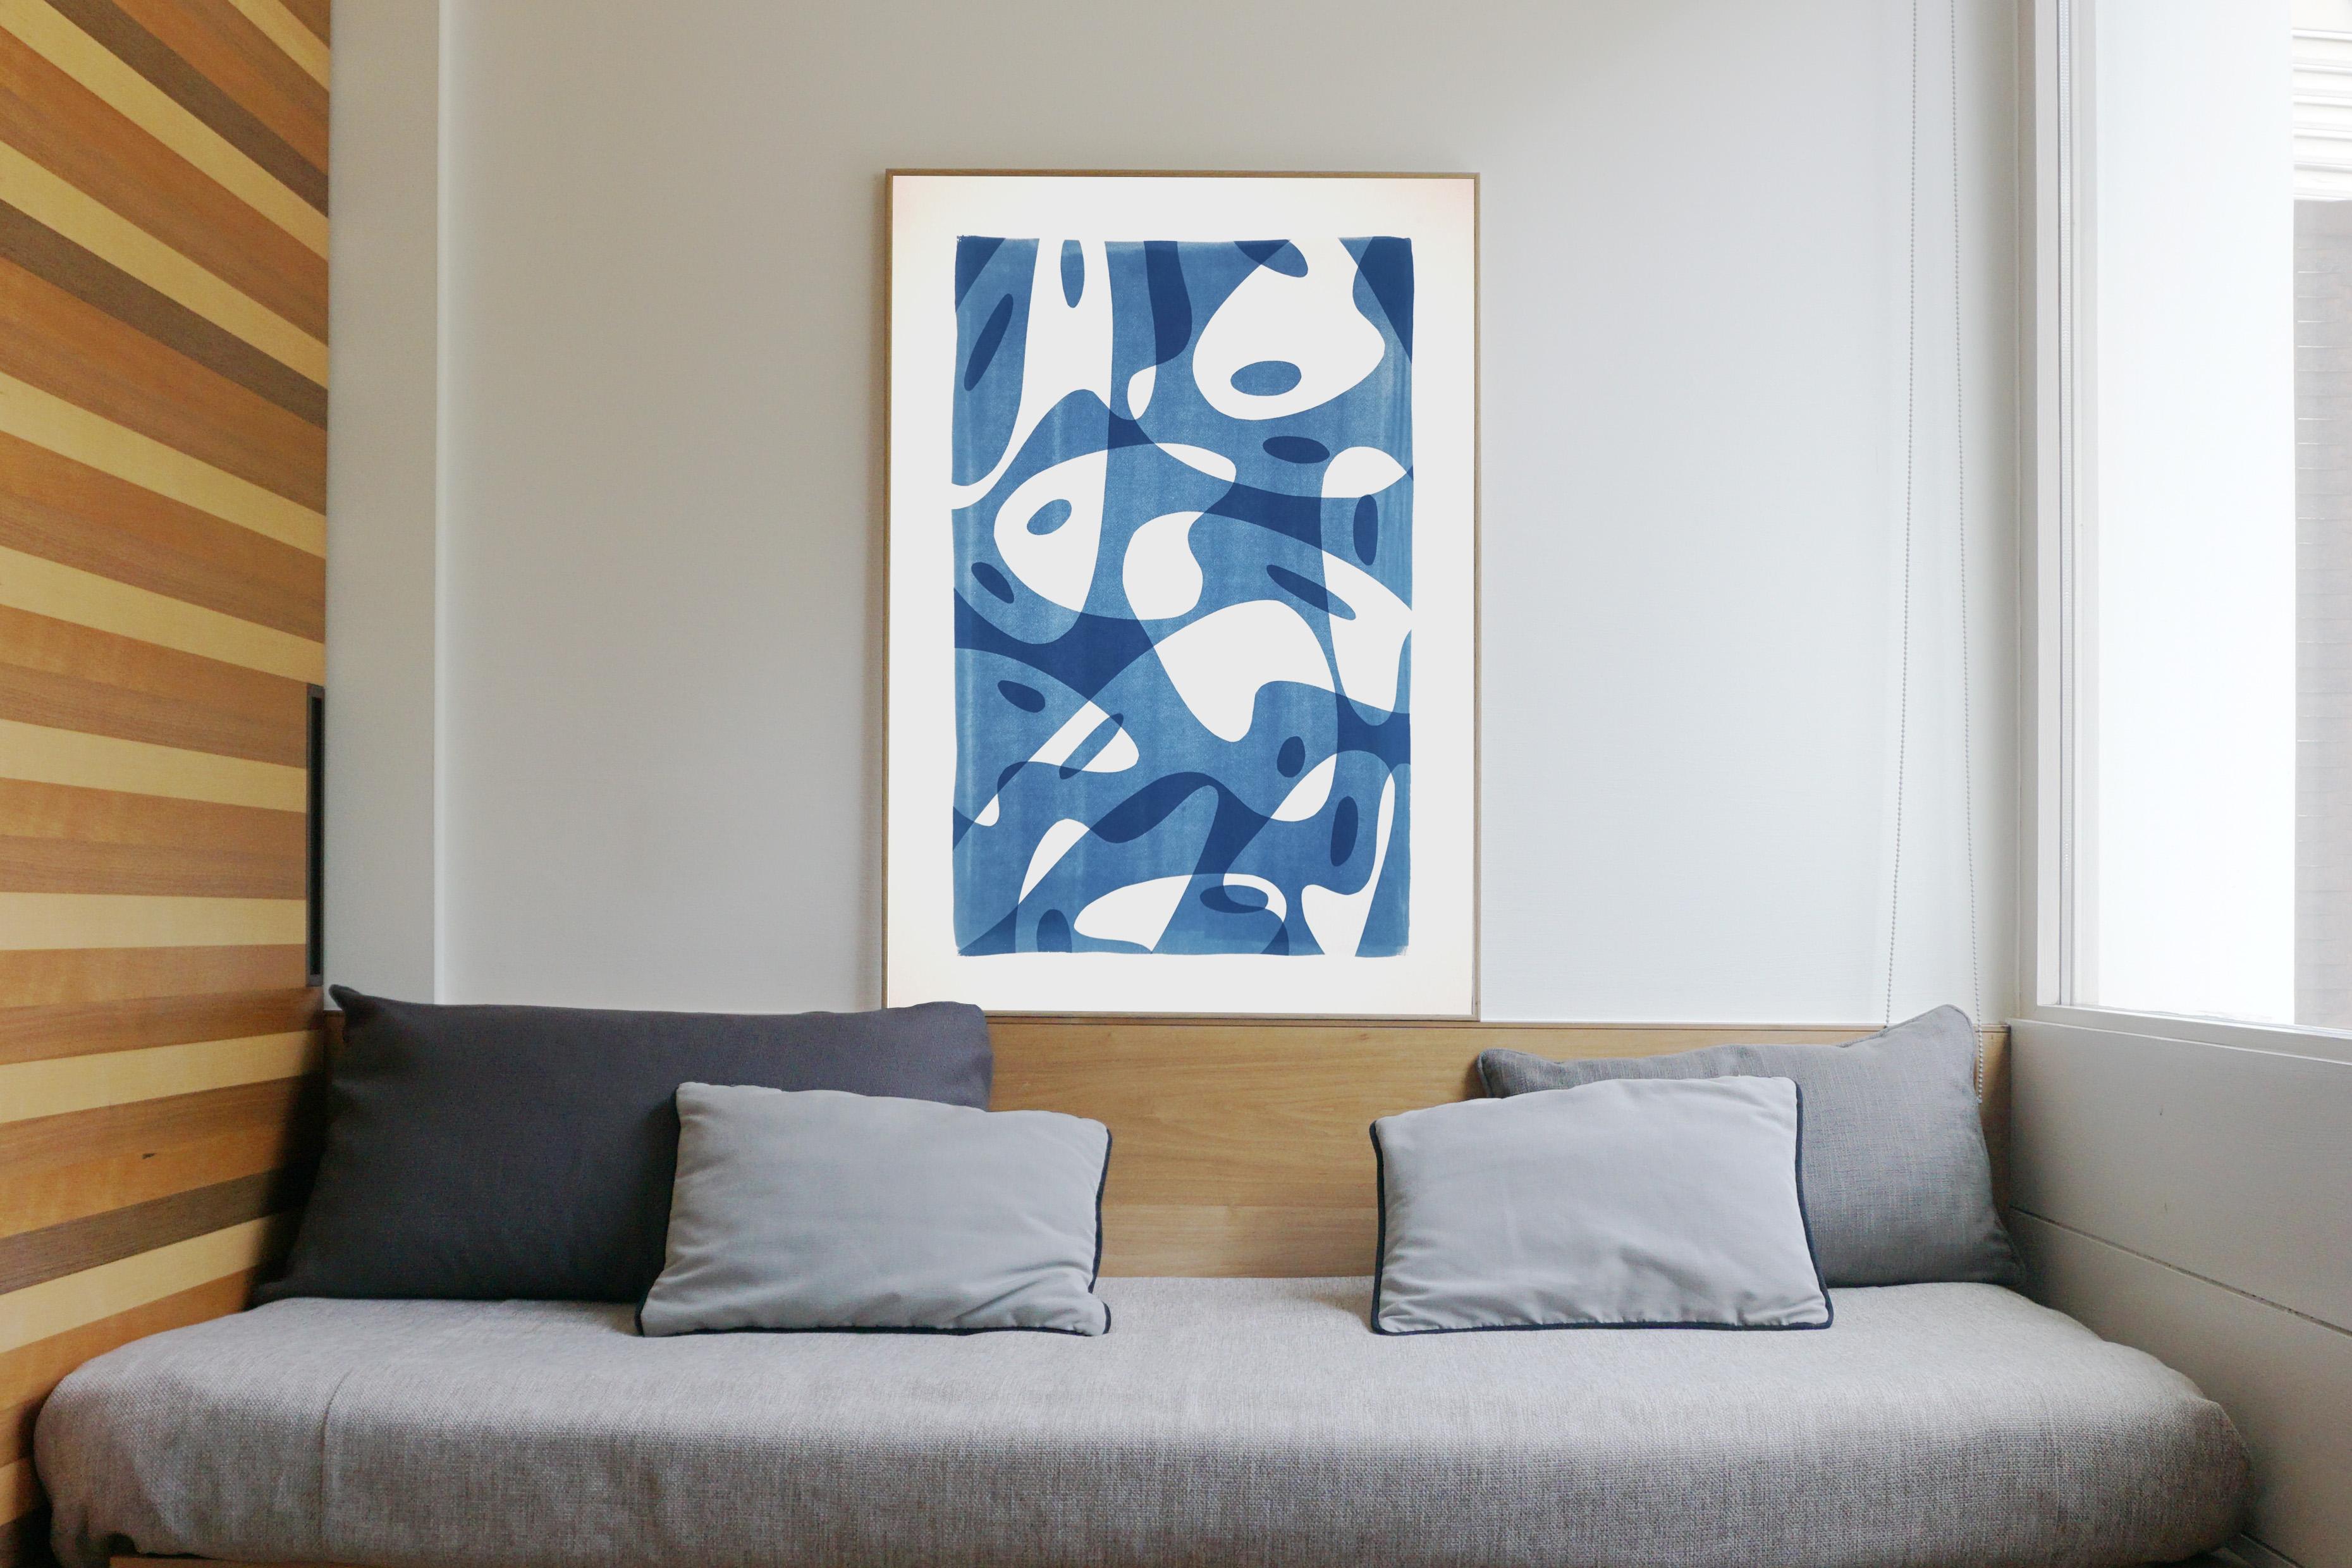 Avant Garde Painter Palette Shapes in Blue Tones, Handmade Monotype on Paper - Abstract Geometric Photograph by Kind of Cyan